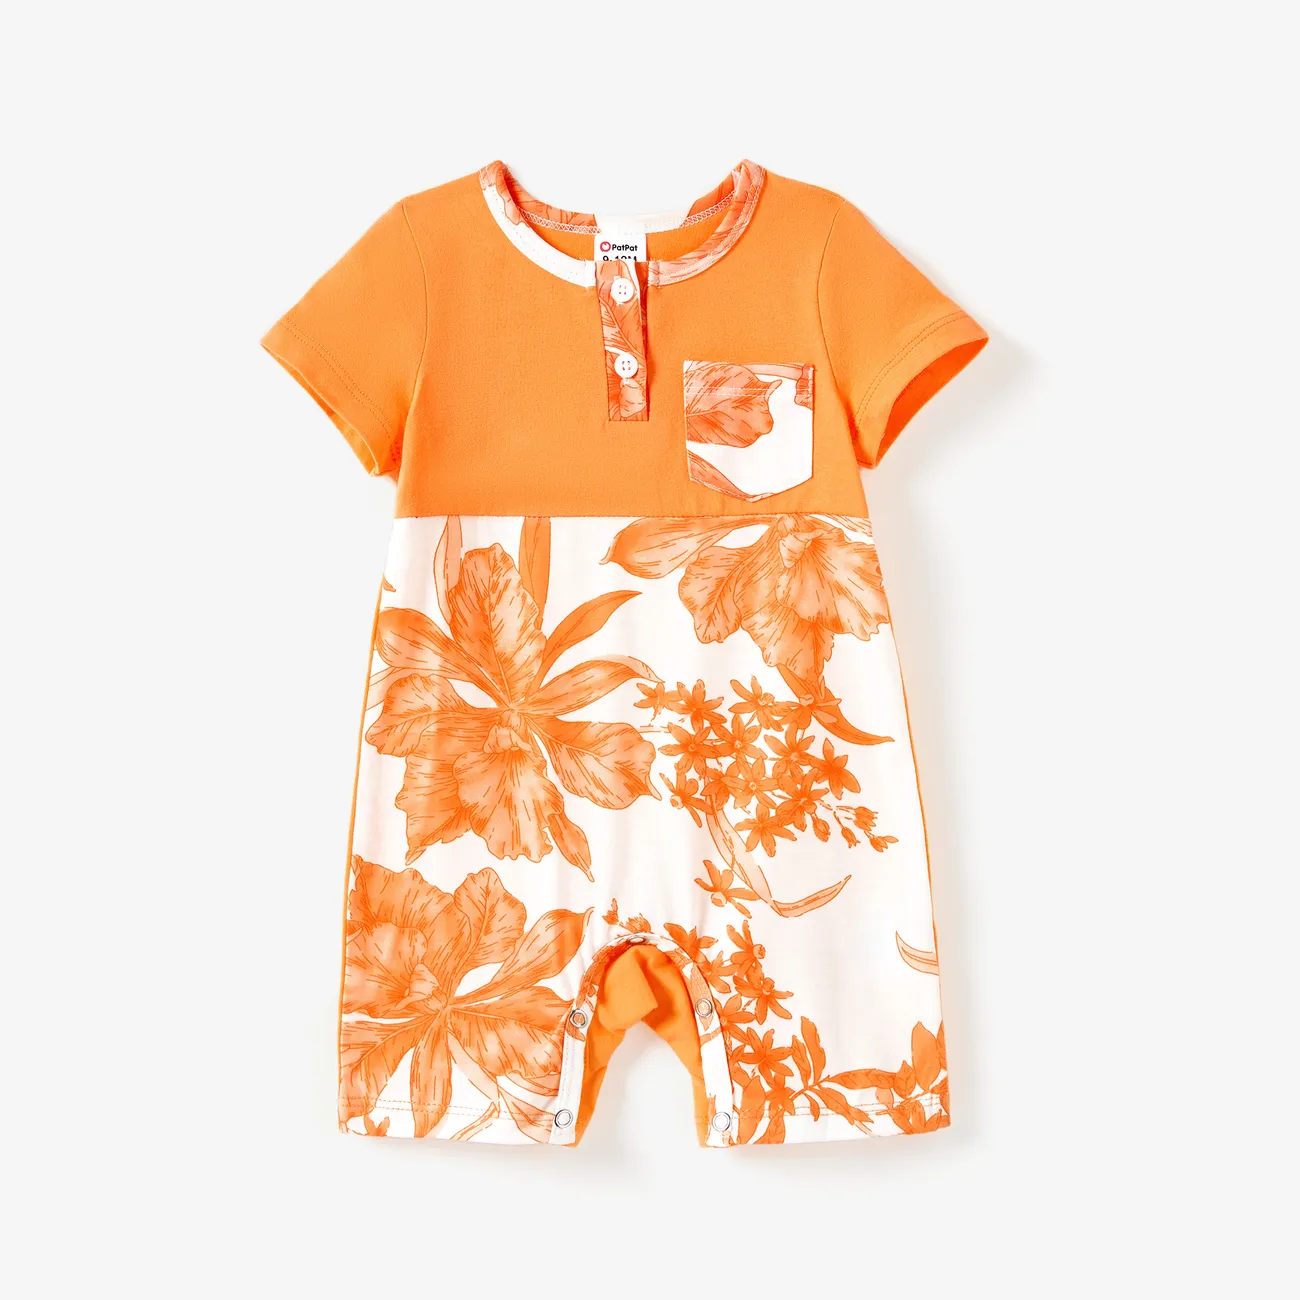 Family Matching Orange Tee and Cami Top Spliced Belted Dress Sets Orange big image 1